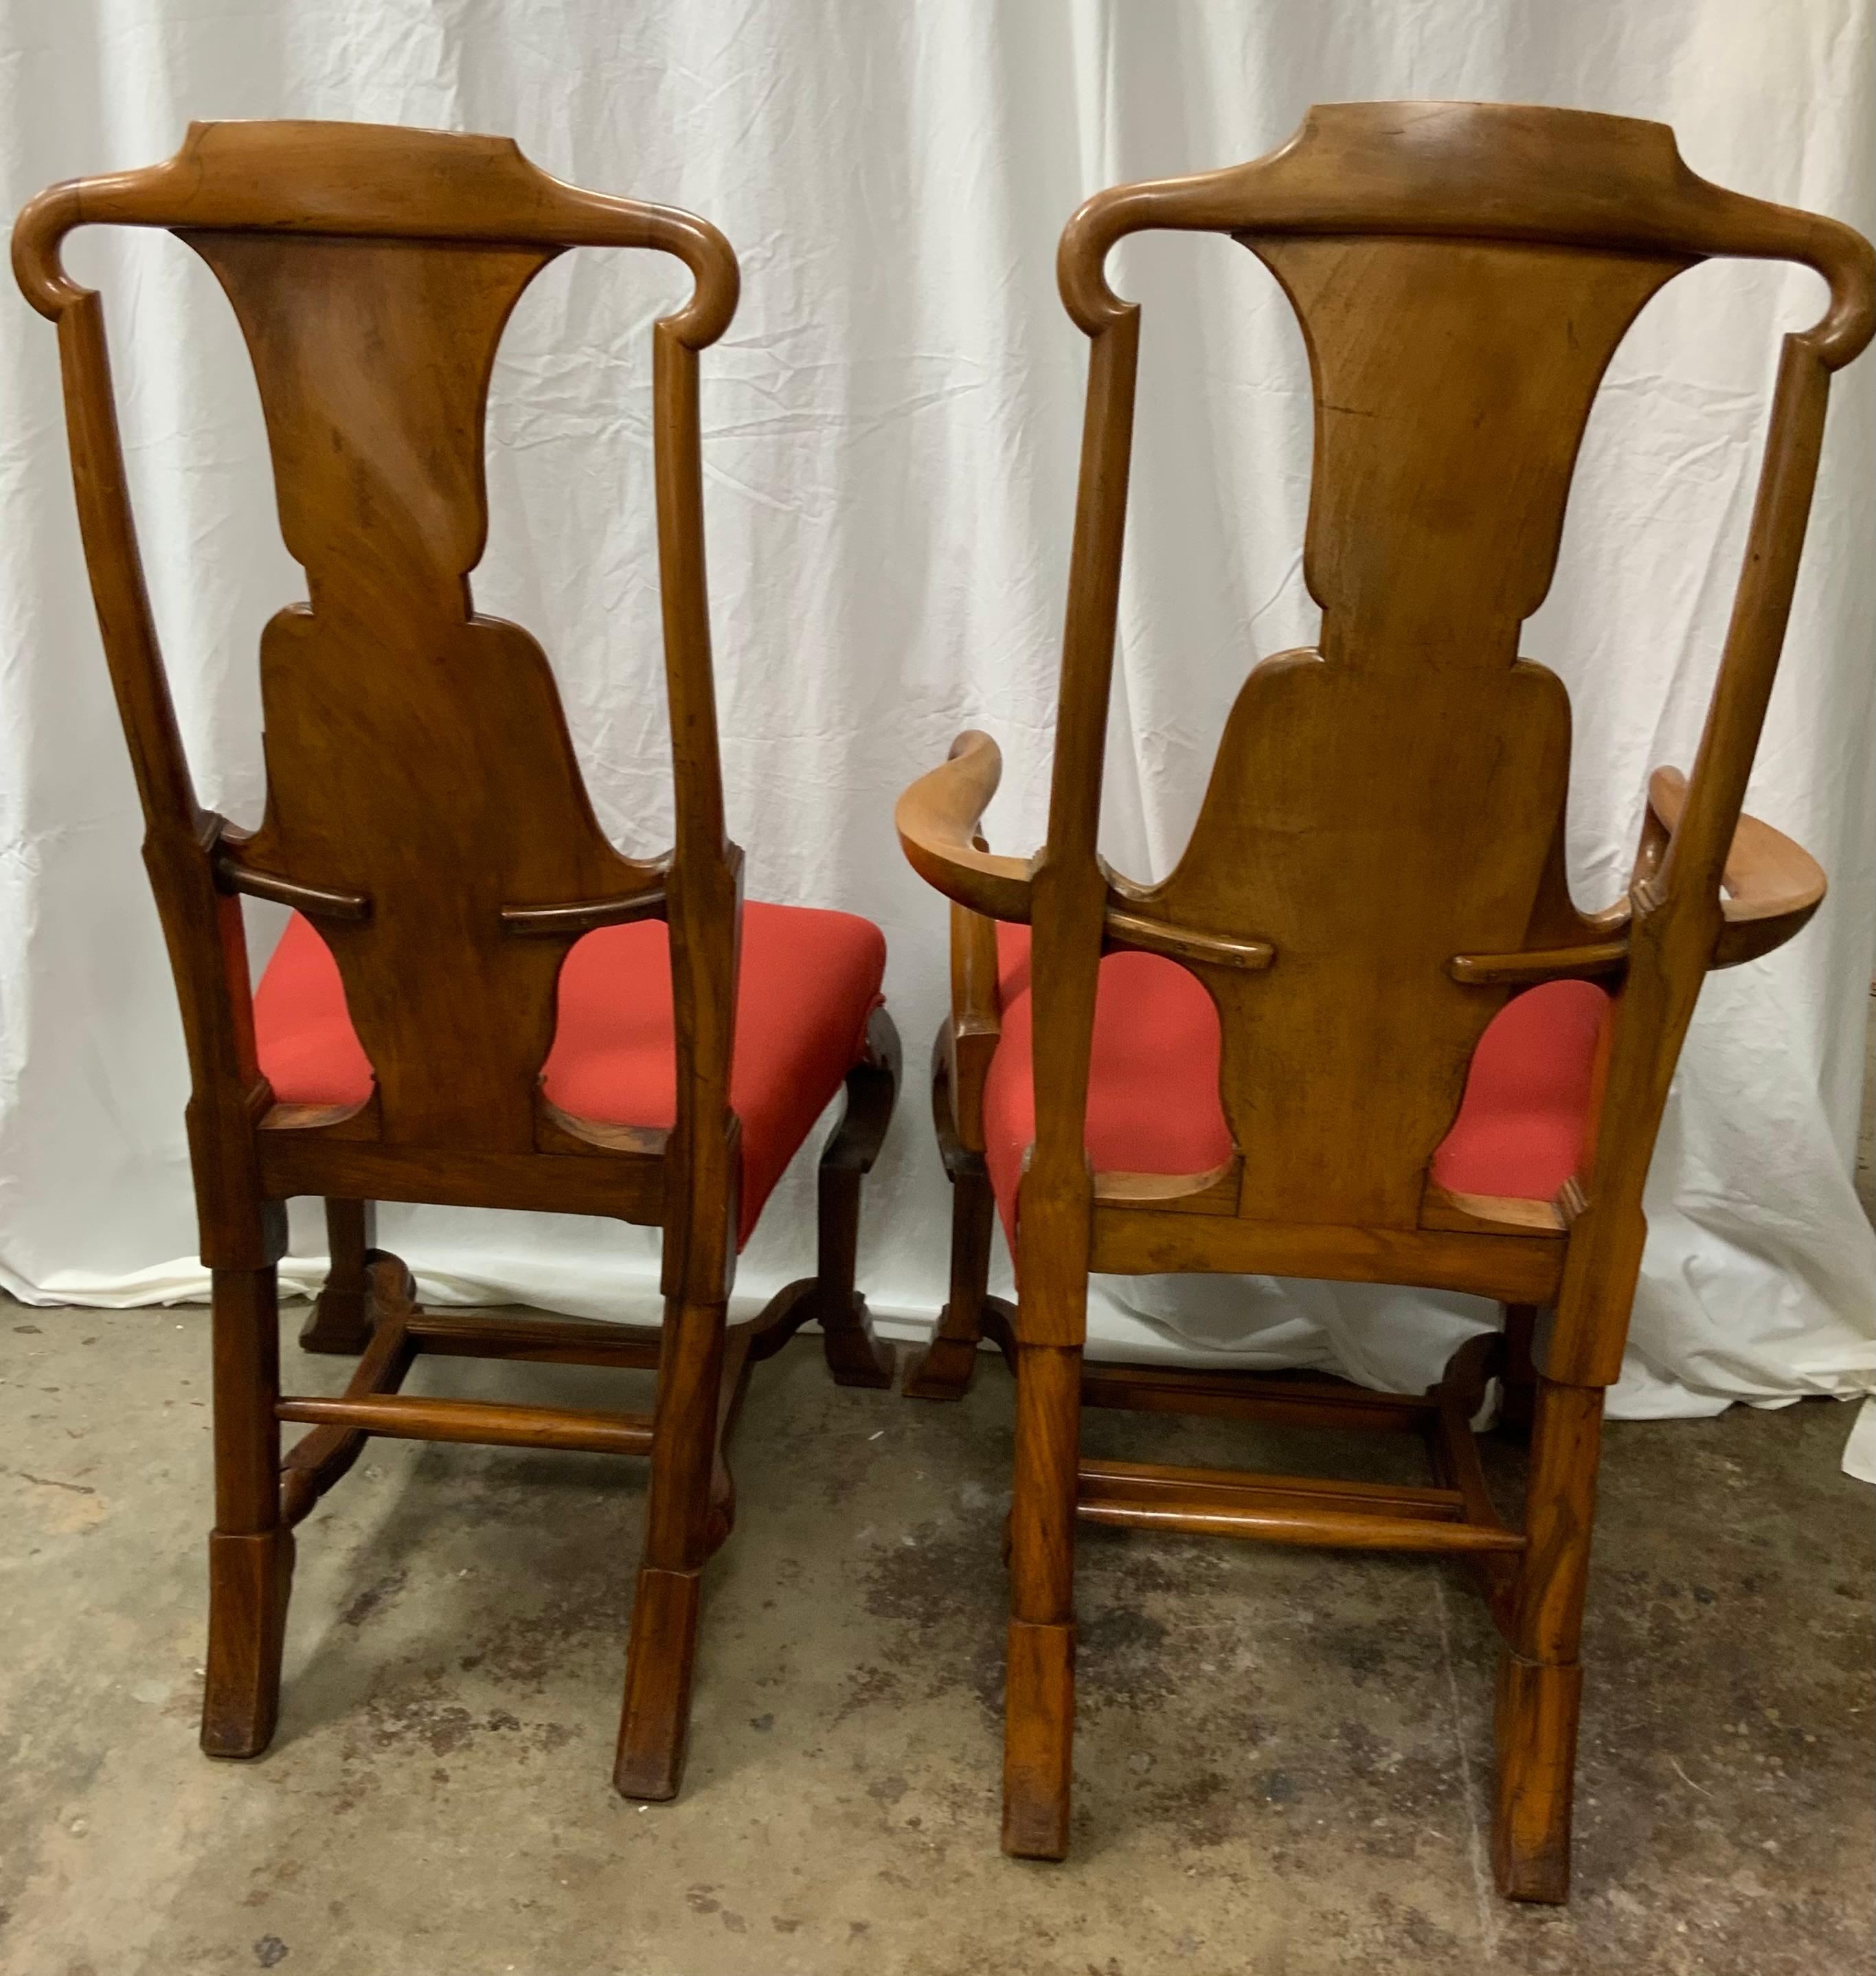 This set of ten English walnut chairs are very unique because they were
Custom made in the 19 th century. They are finely hand crafted bench
Made pieces of of the finest quality. The walnut chairs are finely inlaid
With other exotic woods. The set